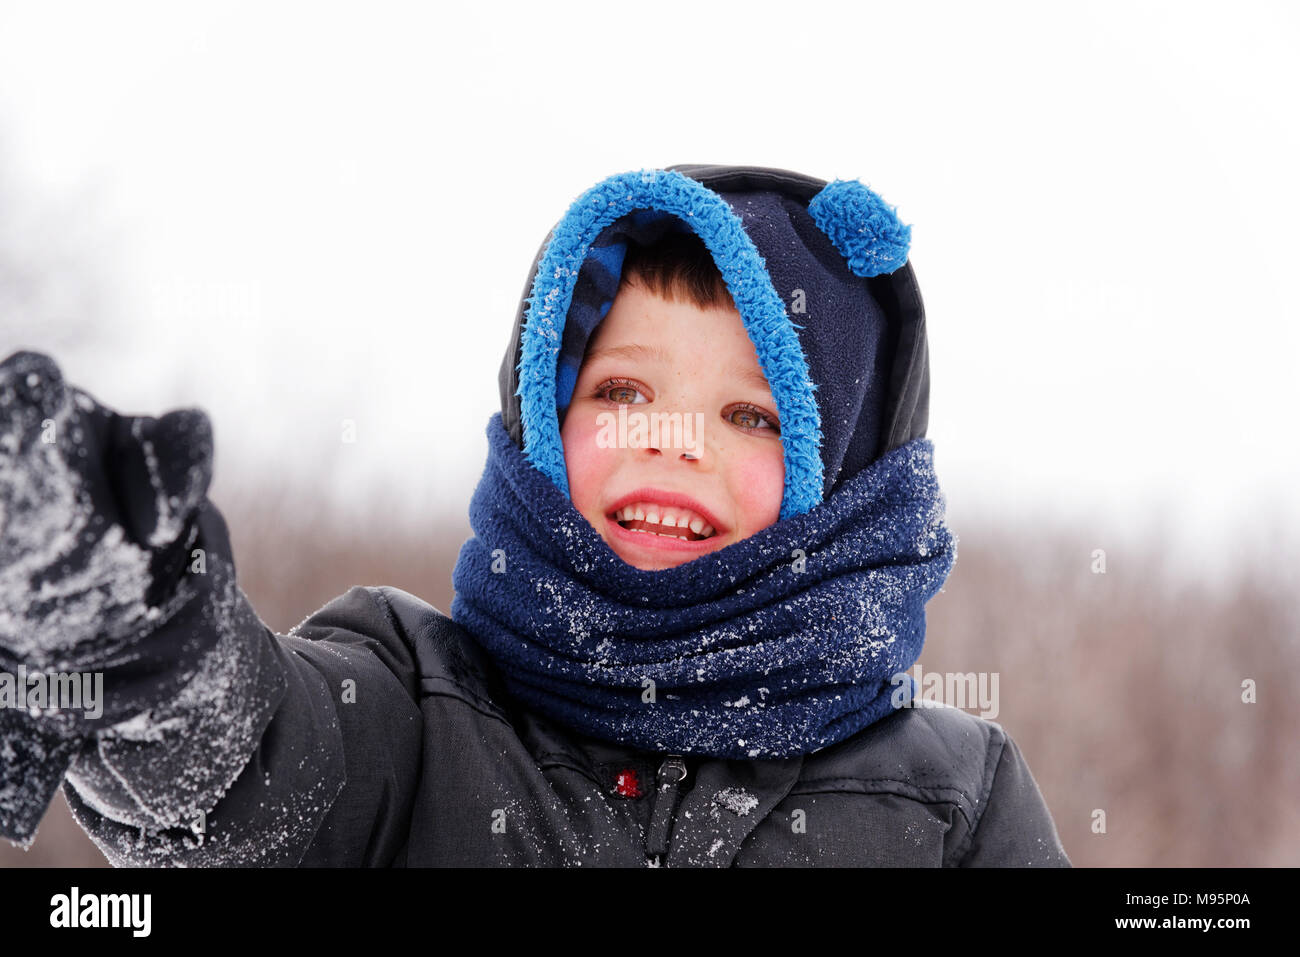 Portrait of young boy (5 yrs old) wearing winter hat and scarf Stock Photo